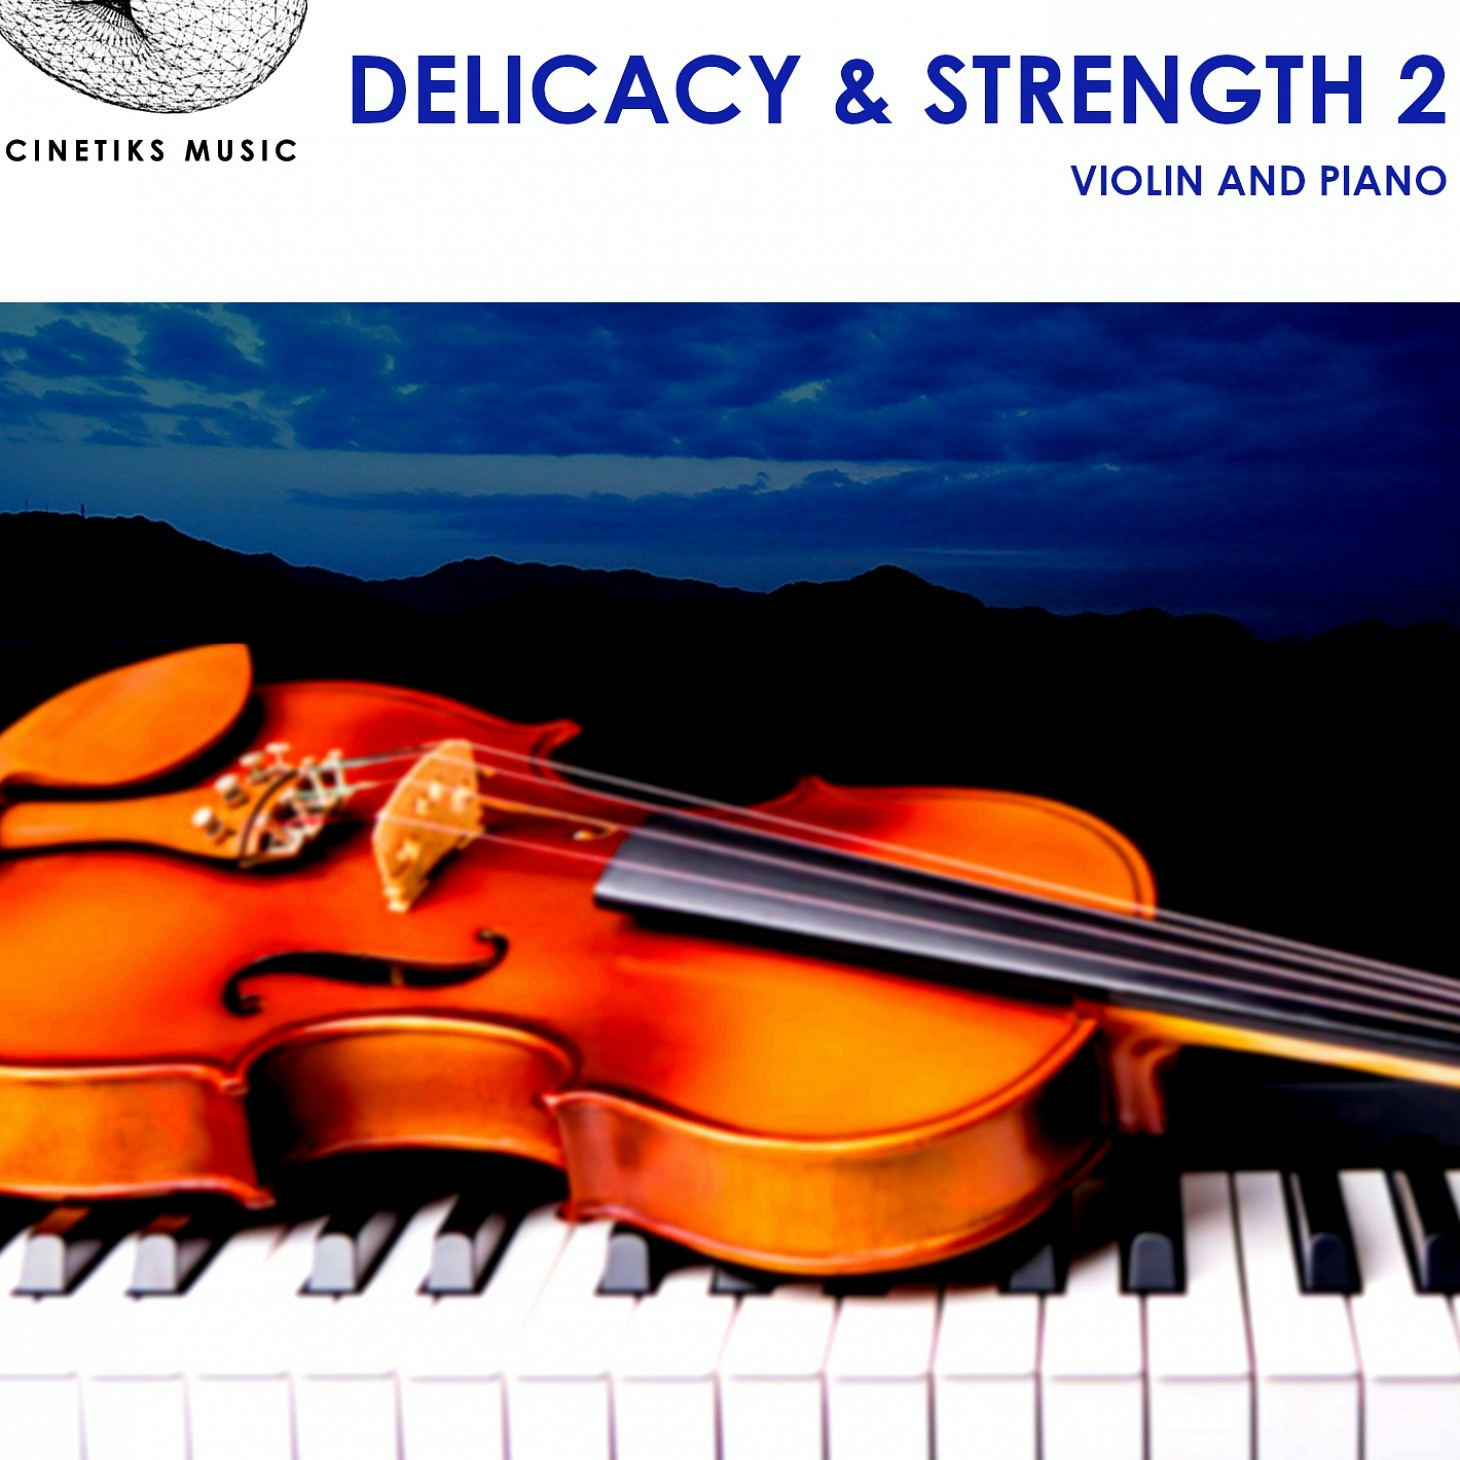 Delicacy and Strength 2 - Violin and Piano